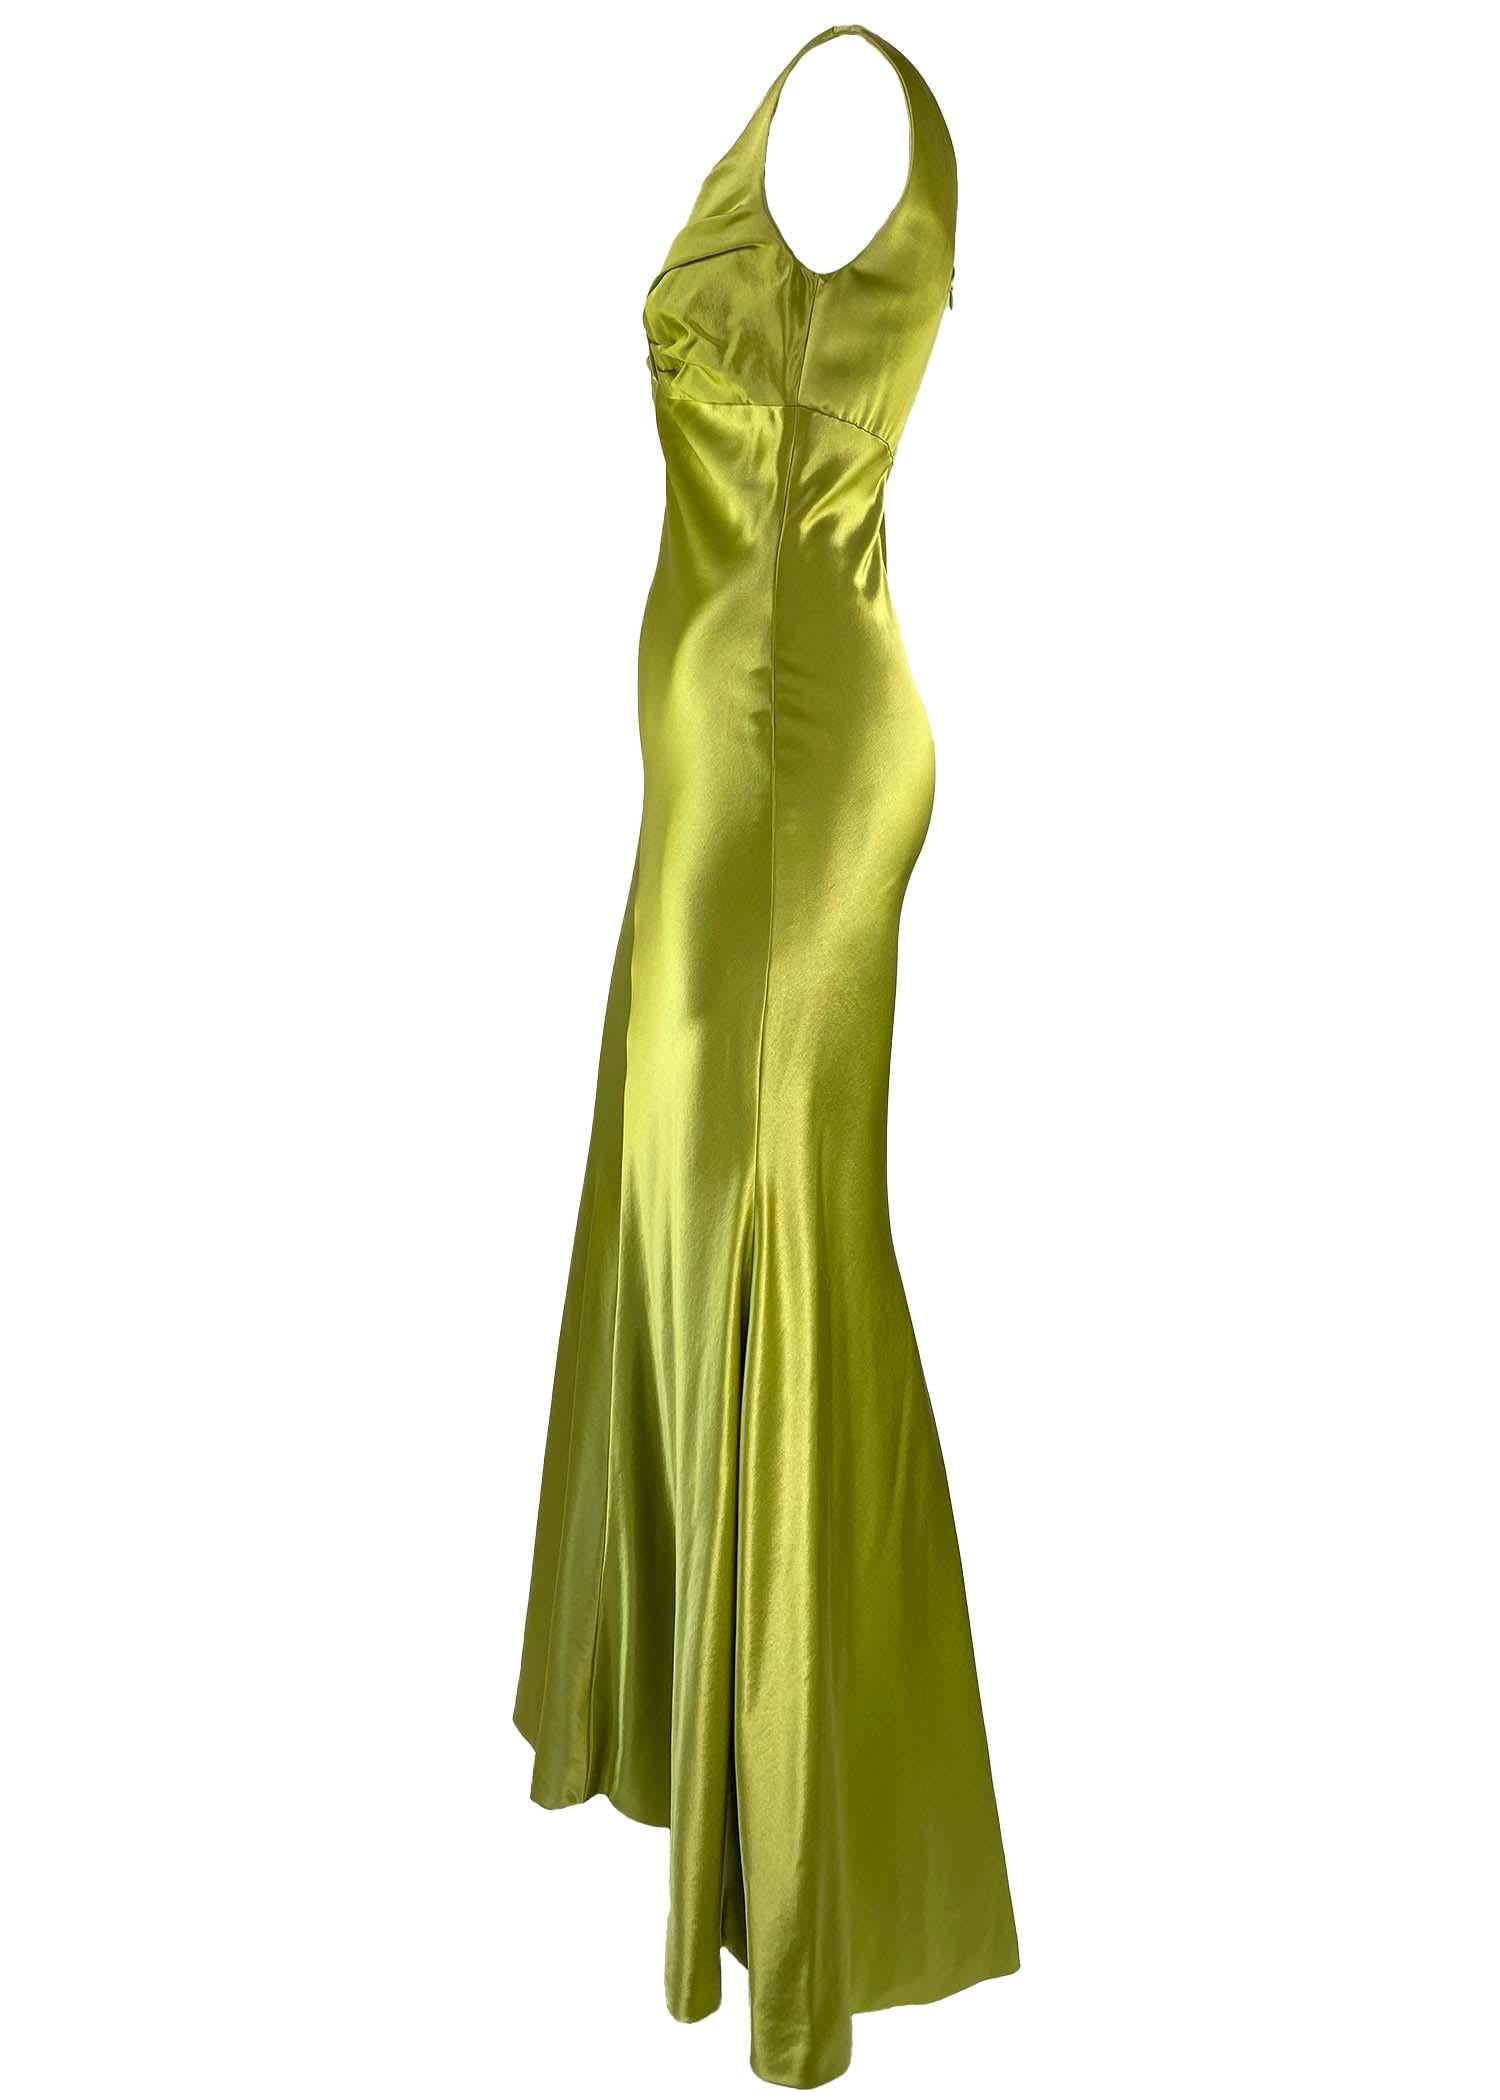 F/W 1995 Gianni Versace Chartreuse Green Silk Gown Dress Runway Documented 3